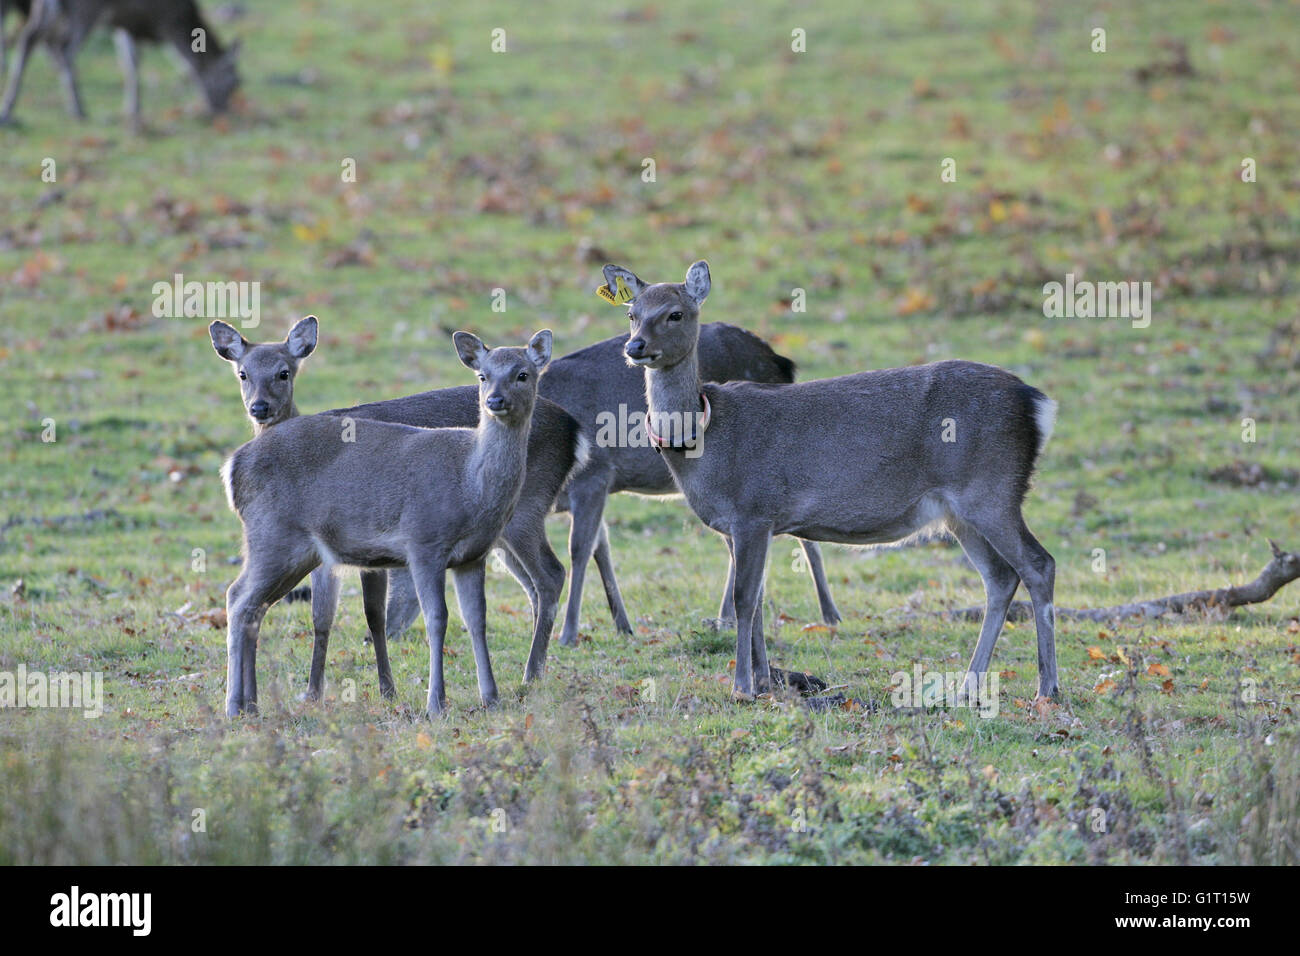 Sika deer Cervus nippon hinds one with ear tag and radio tracking collar Arne Dorset England Stock Photo